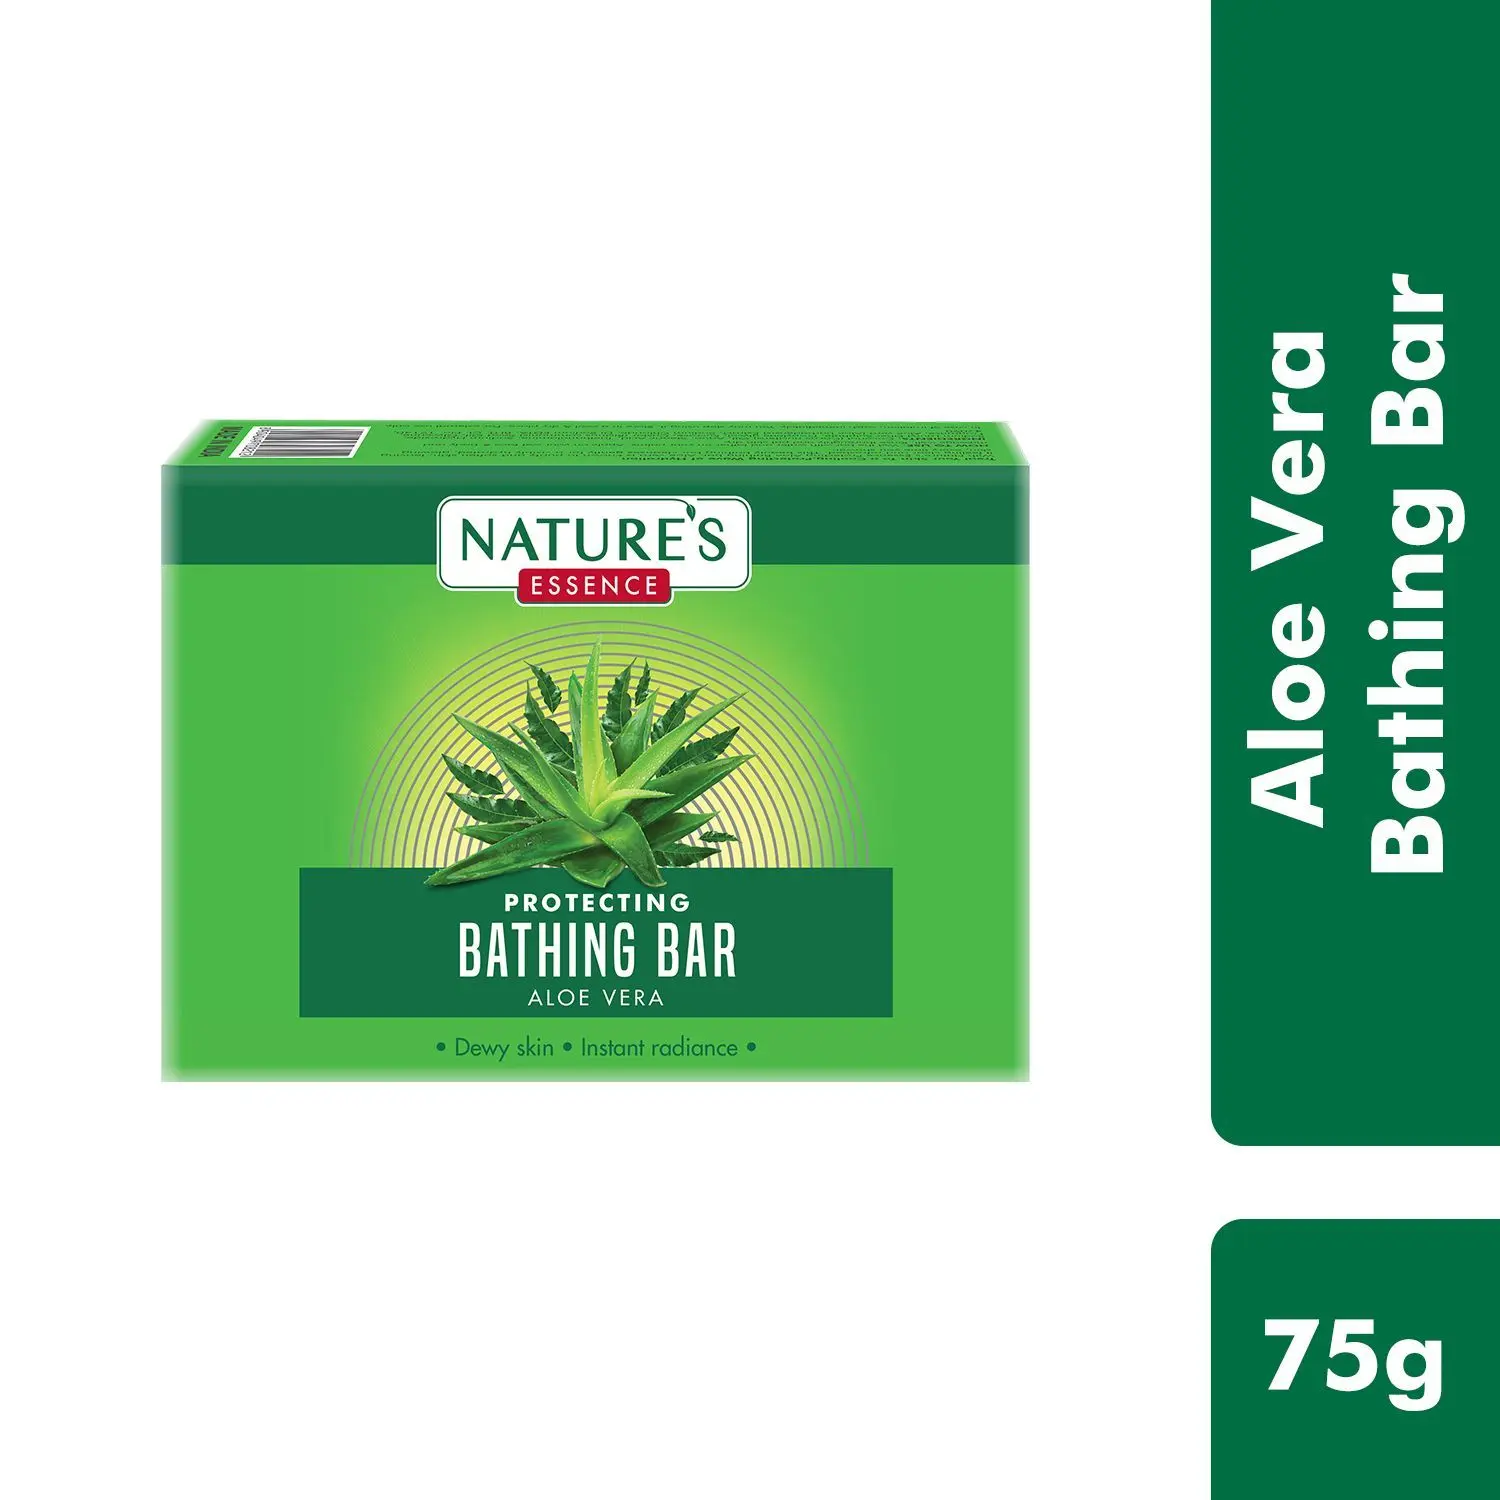 Naturea€™s Essence Aloevera Soap | For dewy skin and instant radiance | 75gm